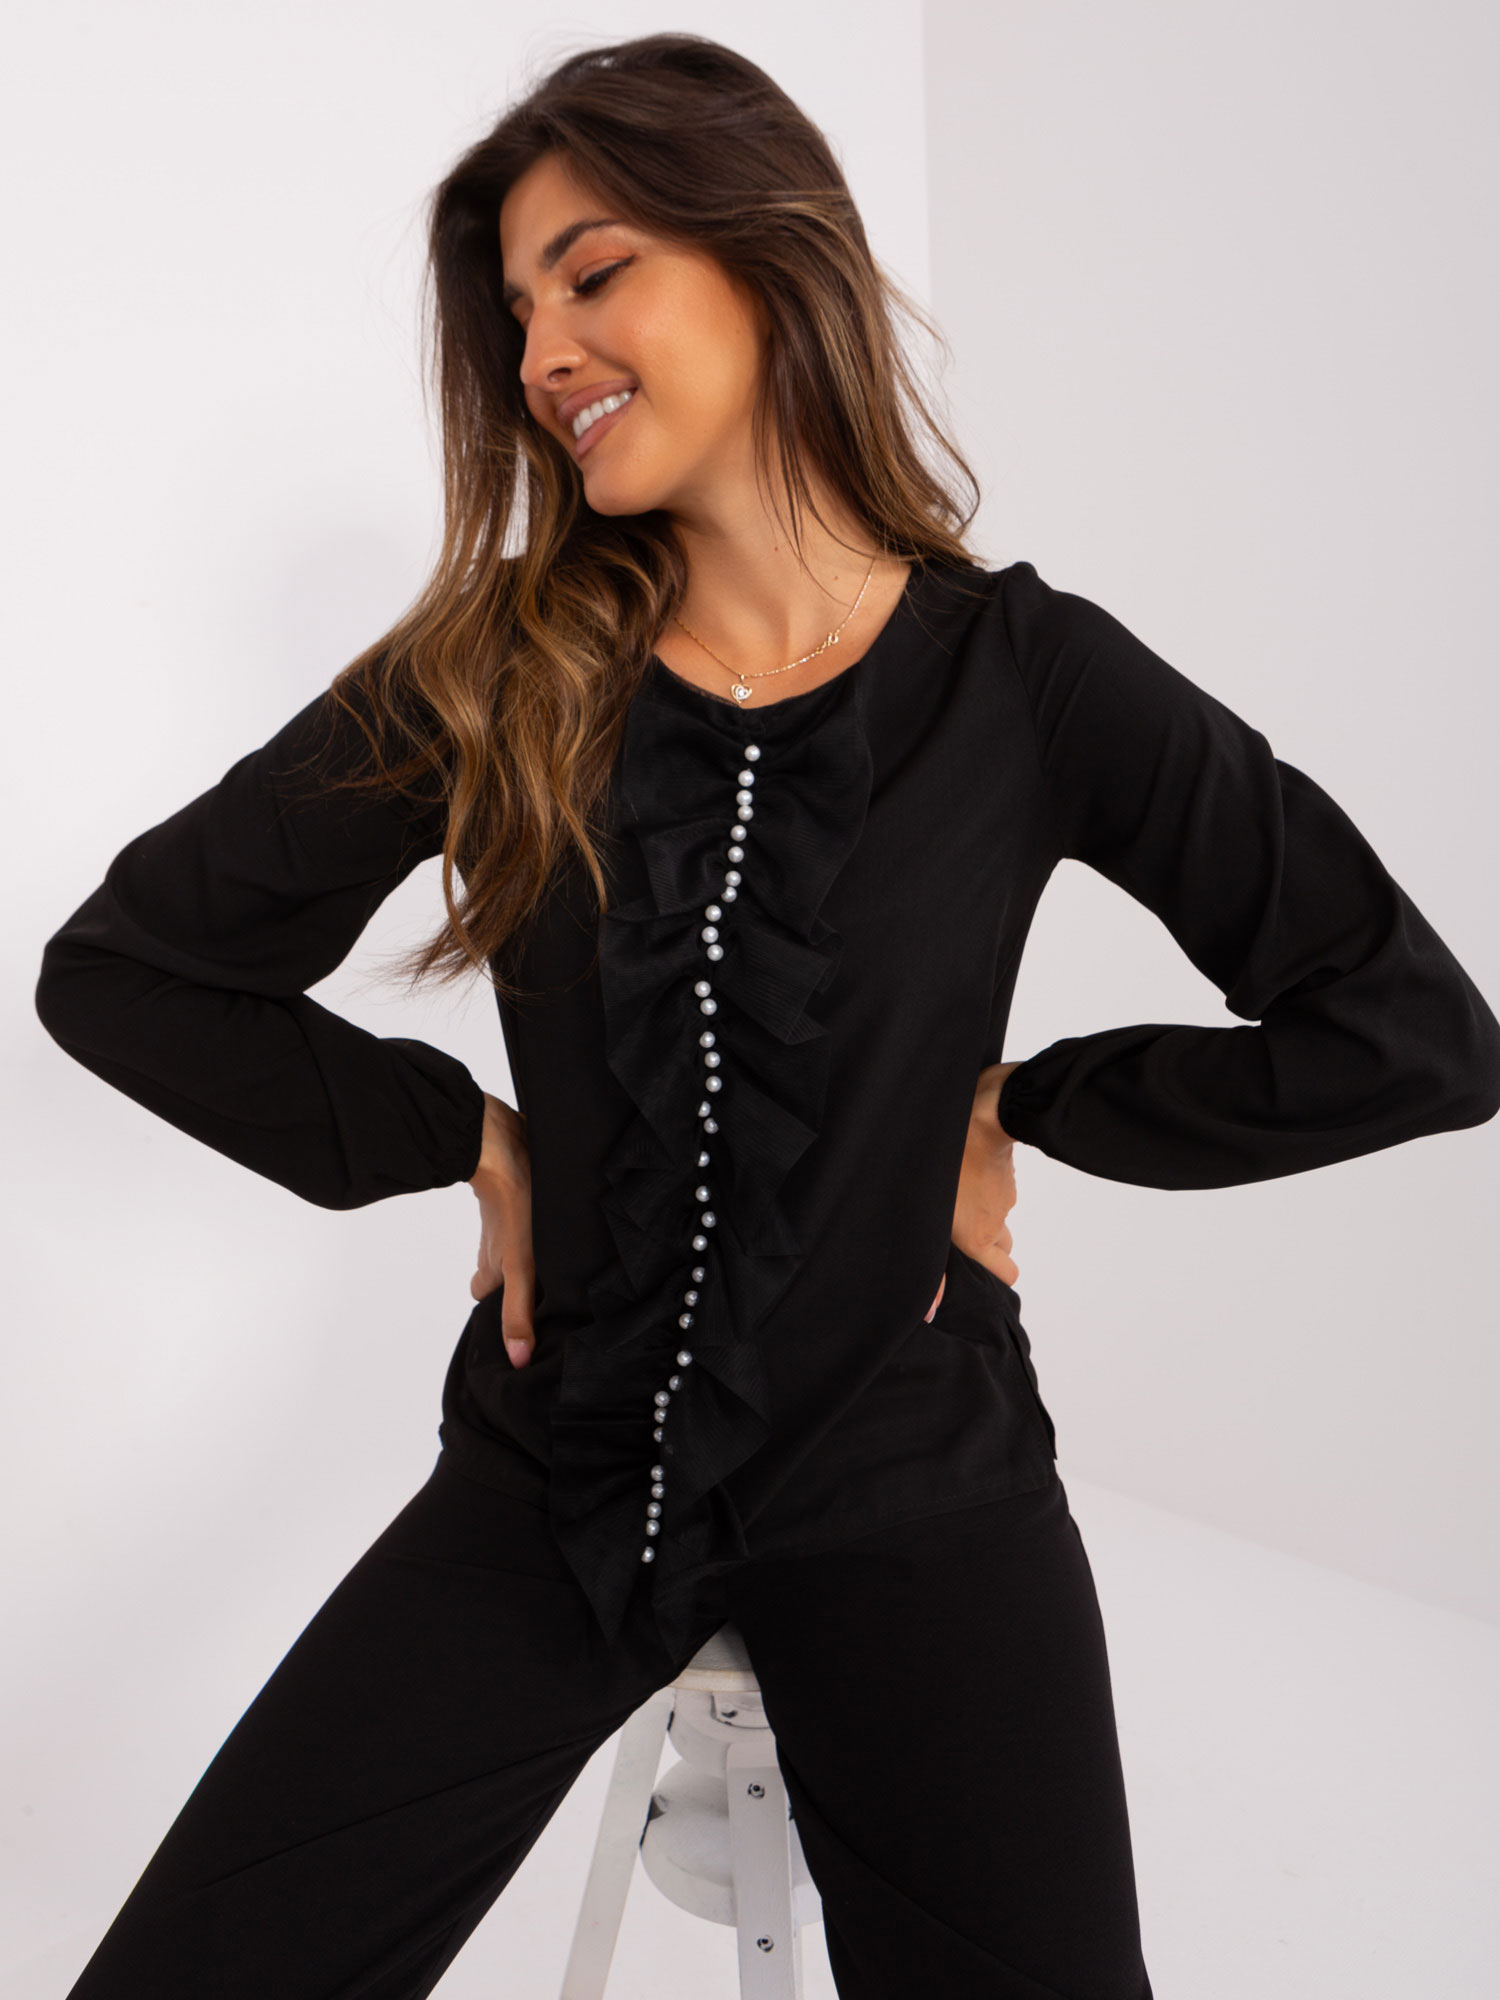 Black formal blouse with long sleeves